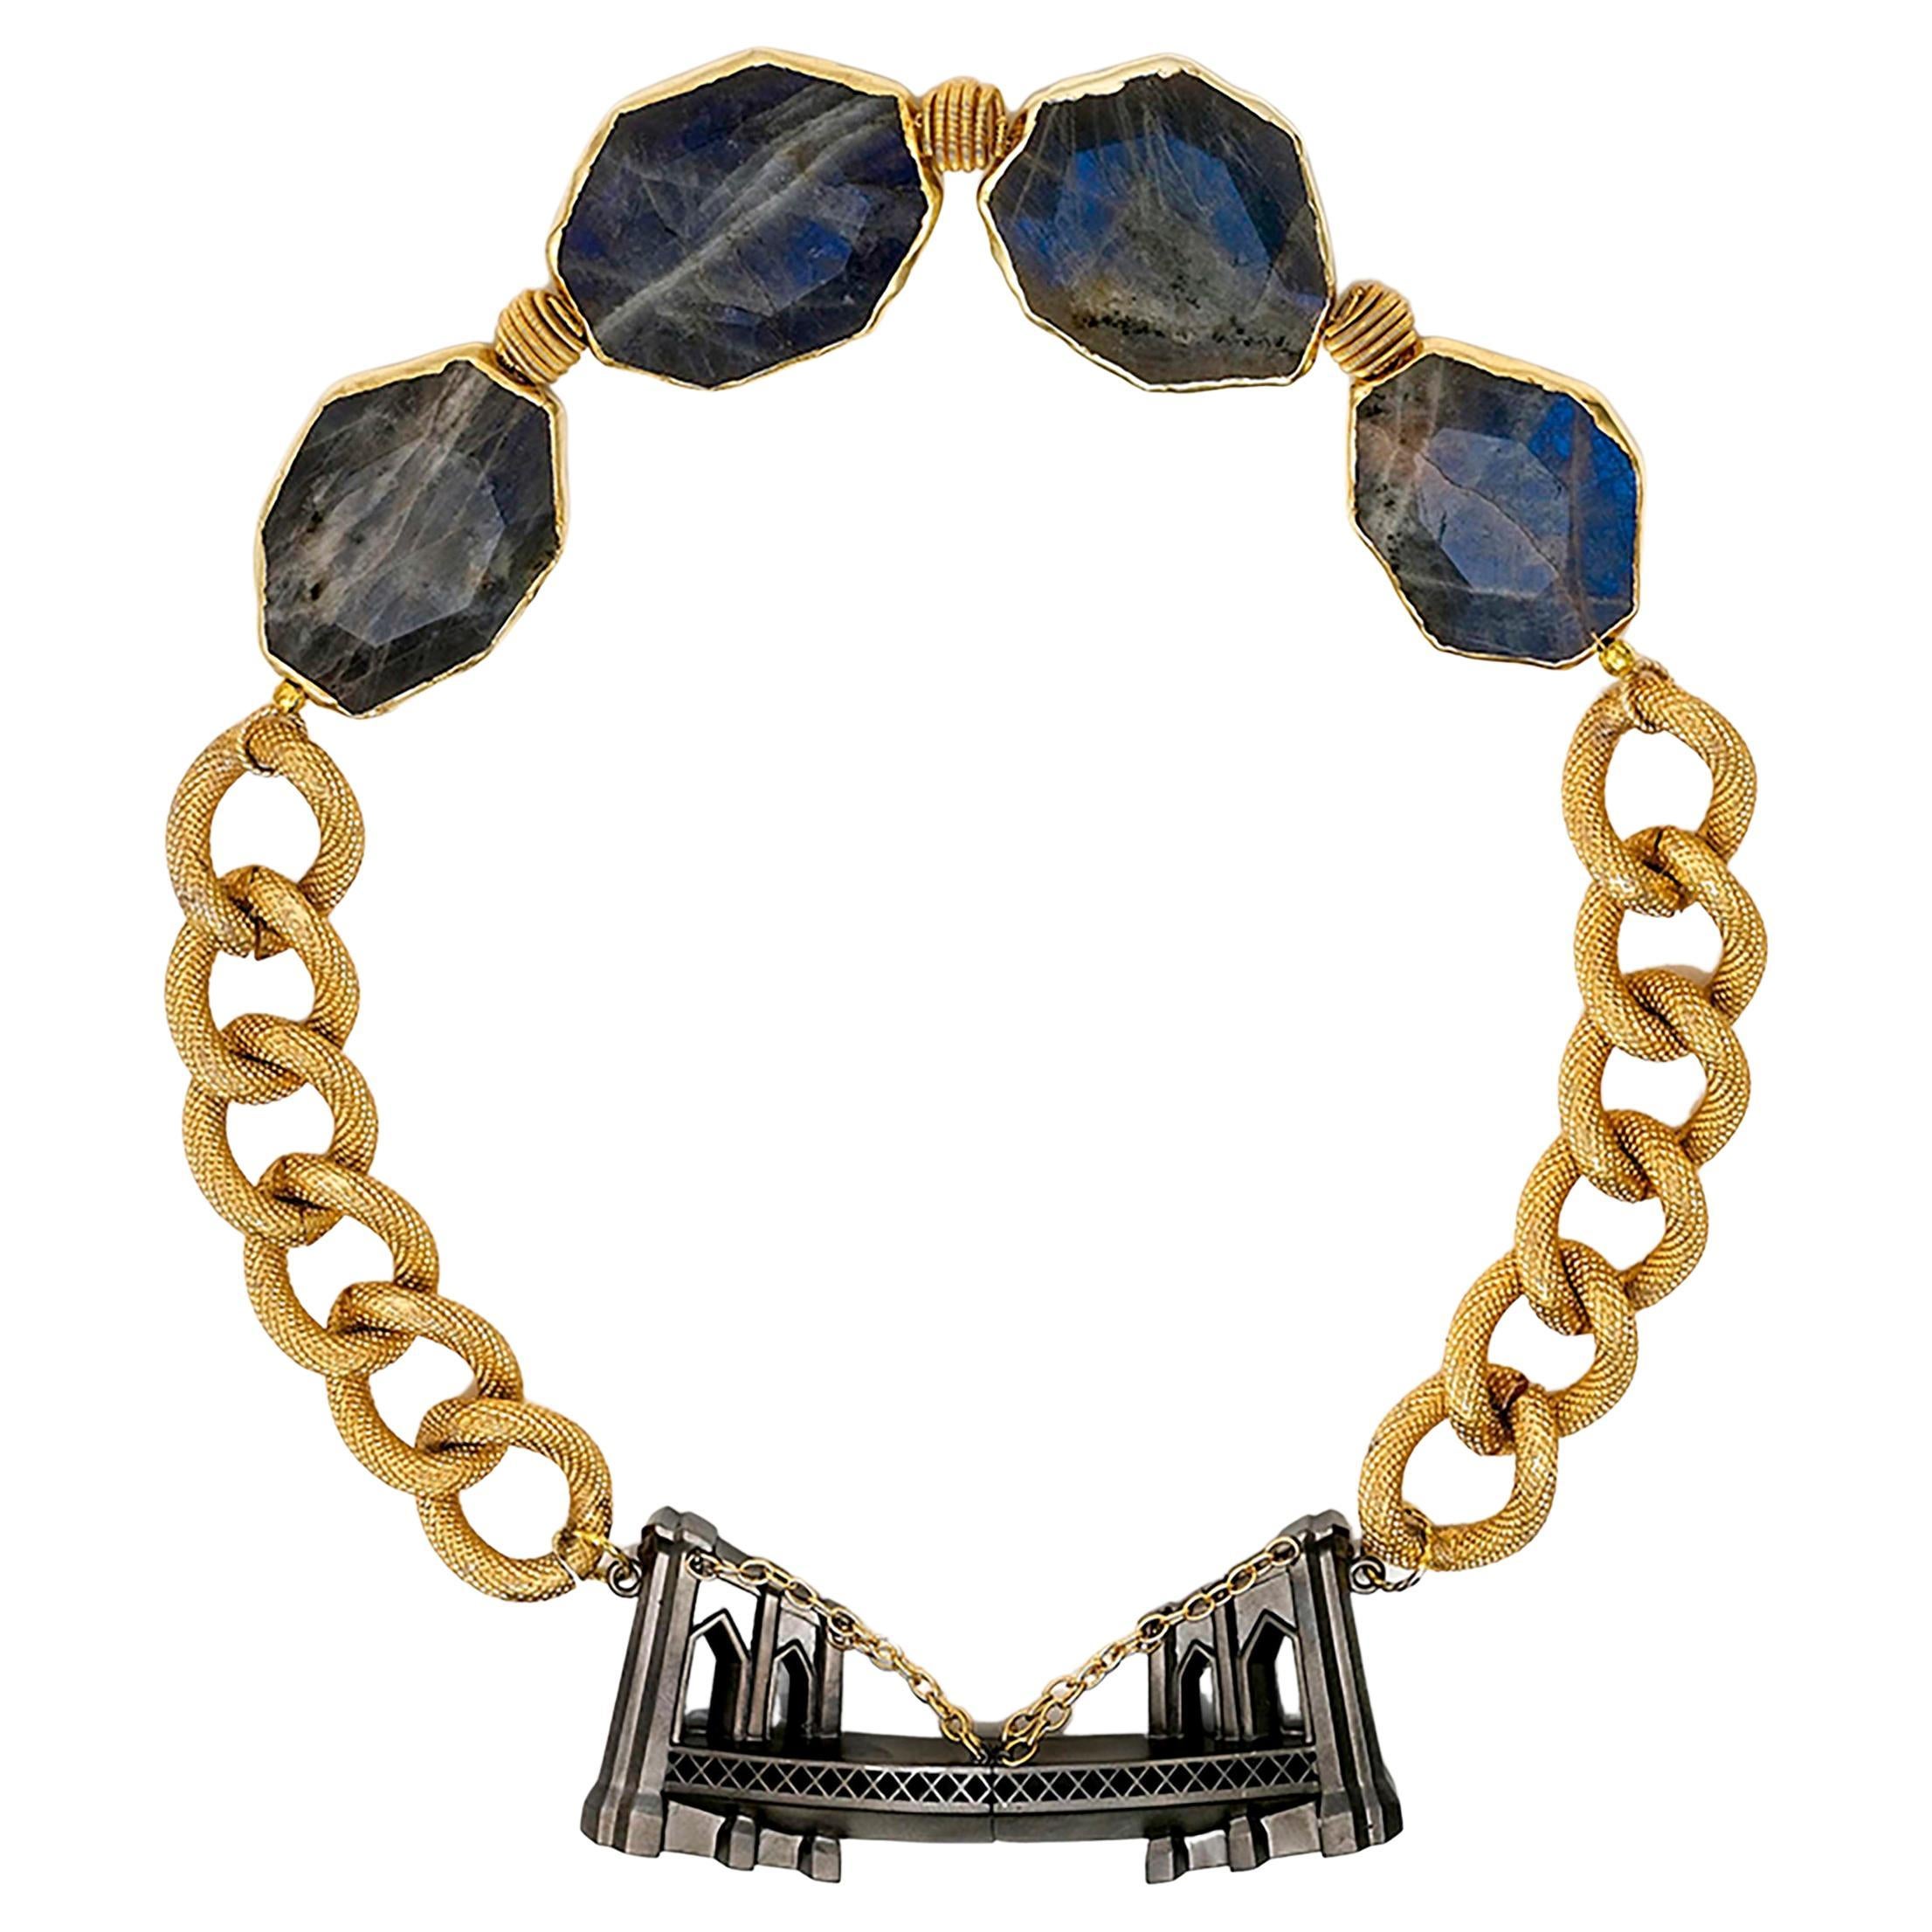 Samantha Siu NY 18k vermeil over silver reversible necklace with labradorite. For Sale